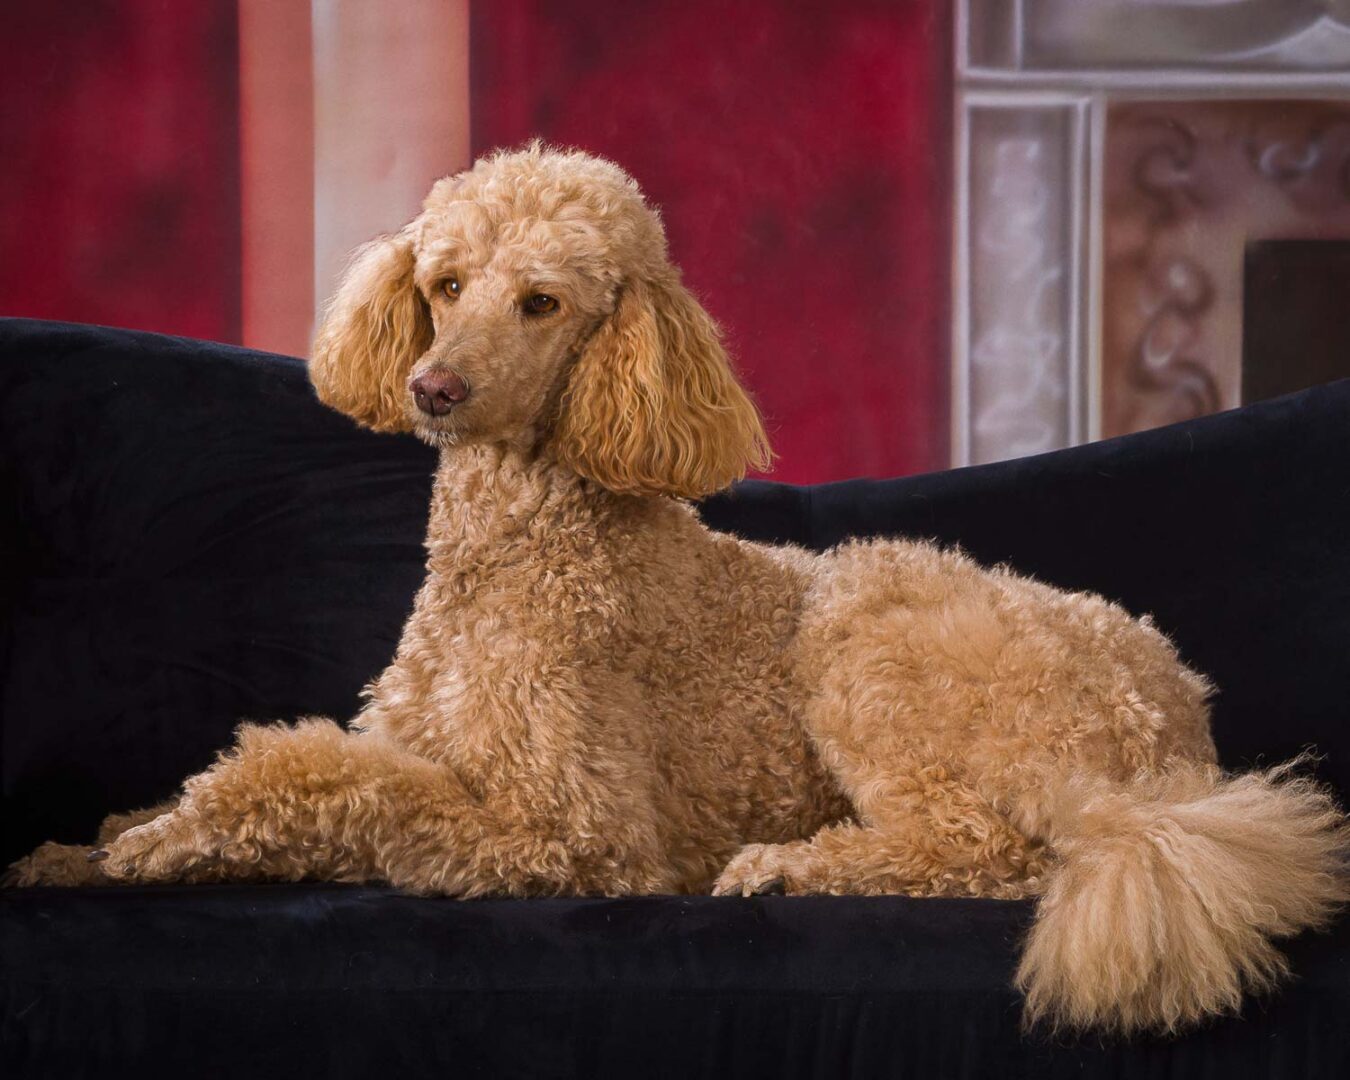 A poodle dog sitting on the couch